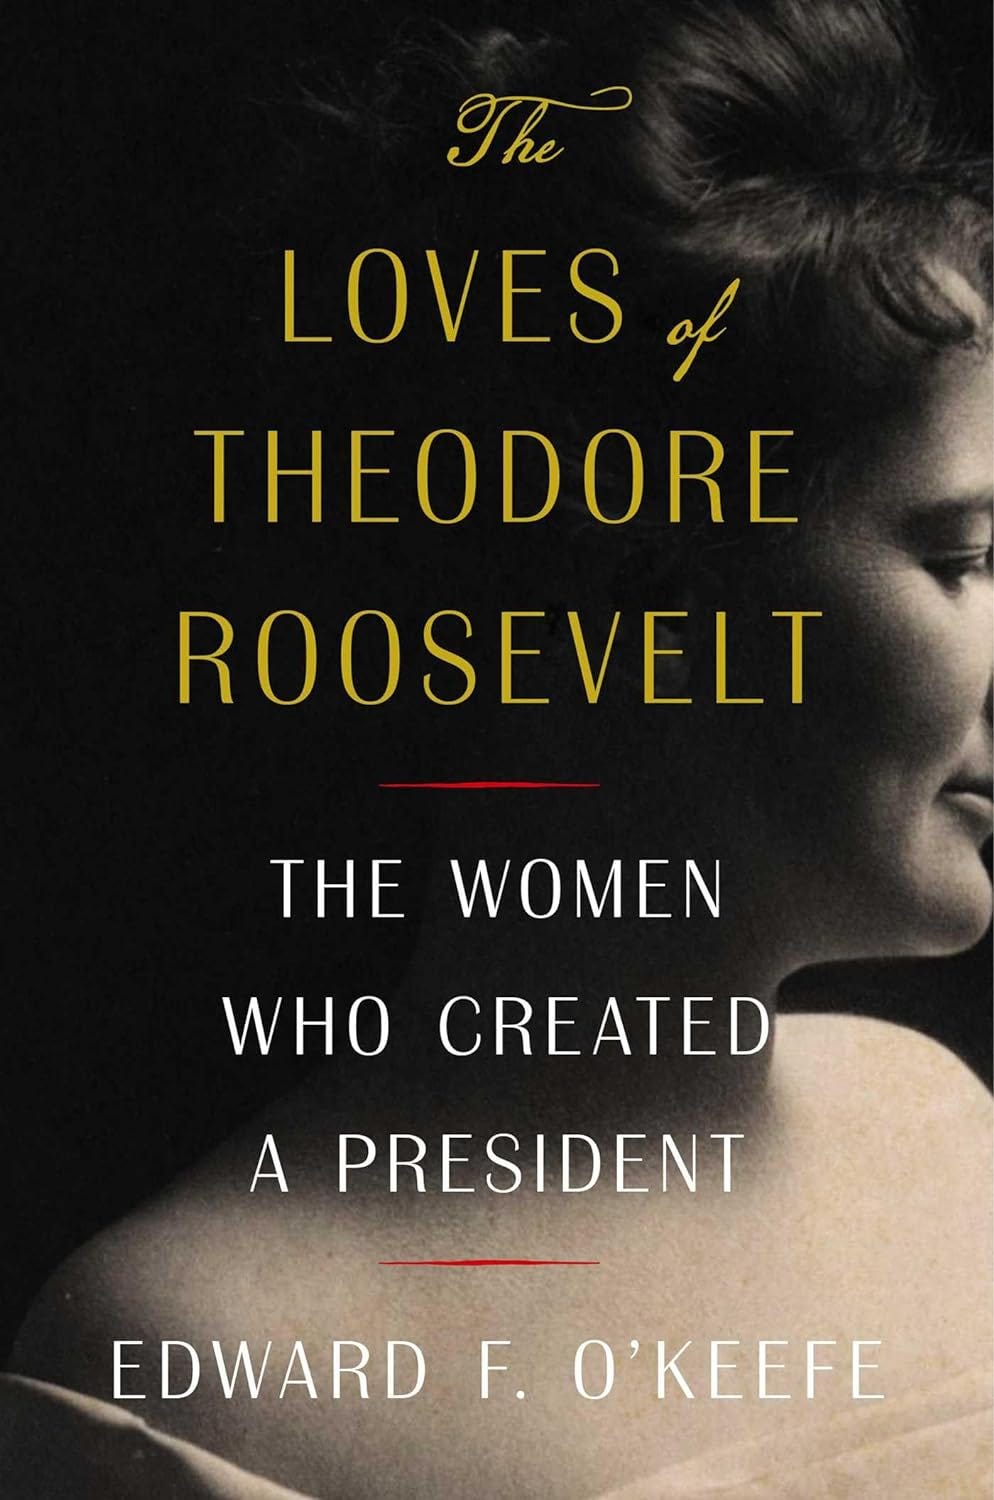 The Loves of Theodore Roosevelt: The Women Who Created a President PDF